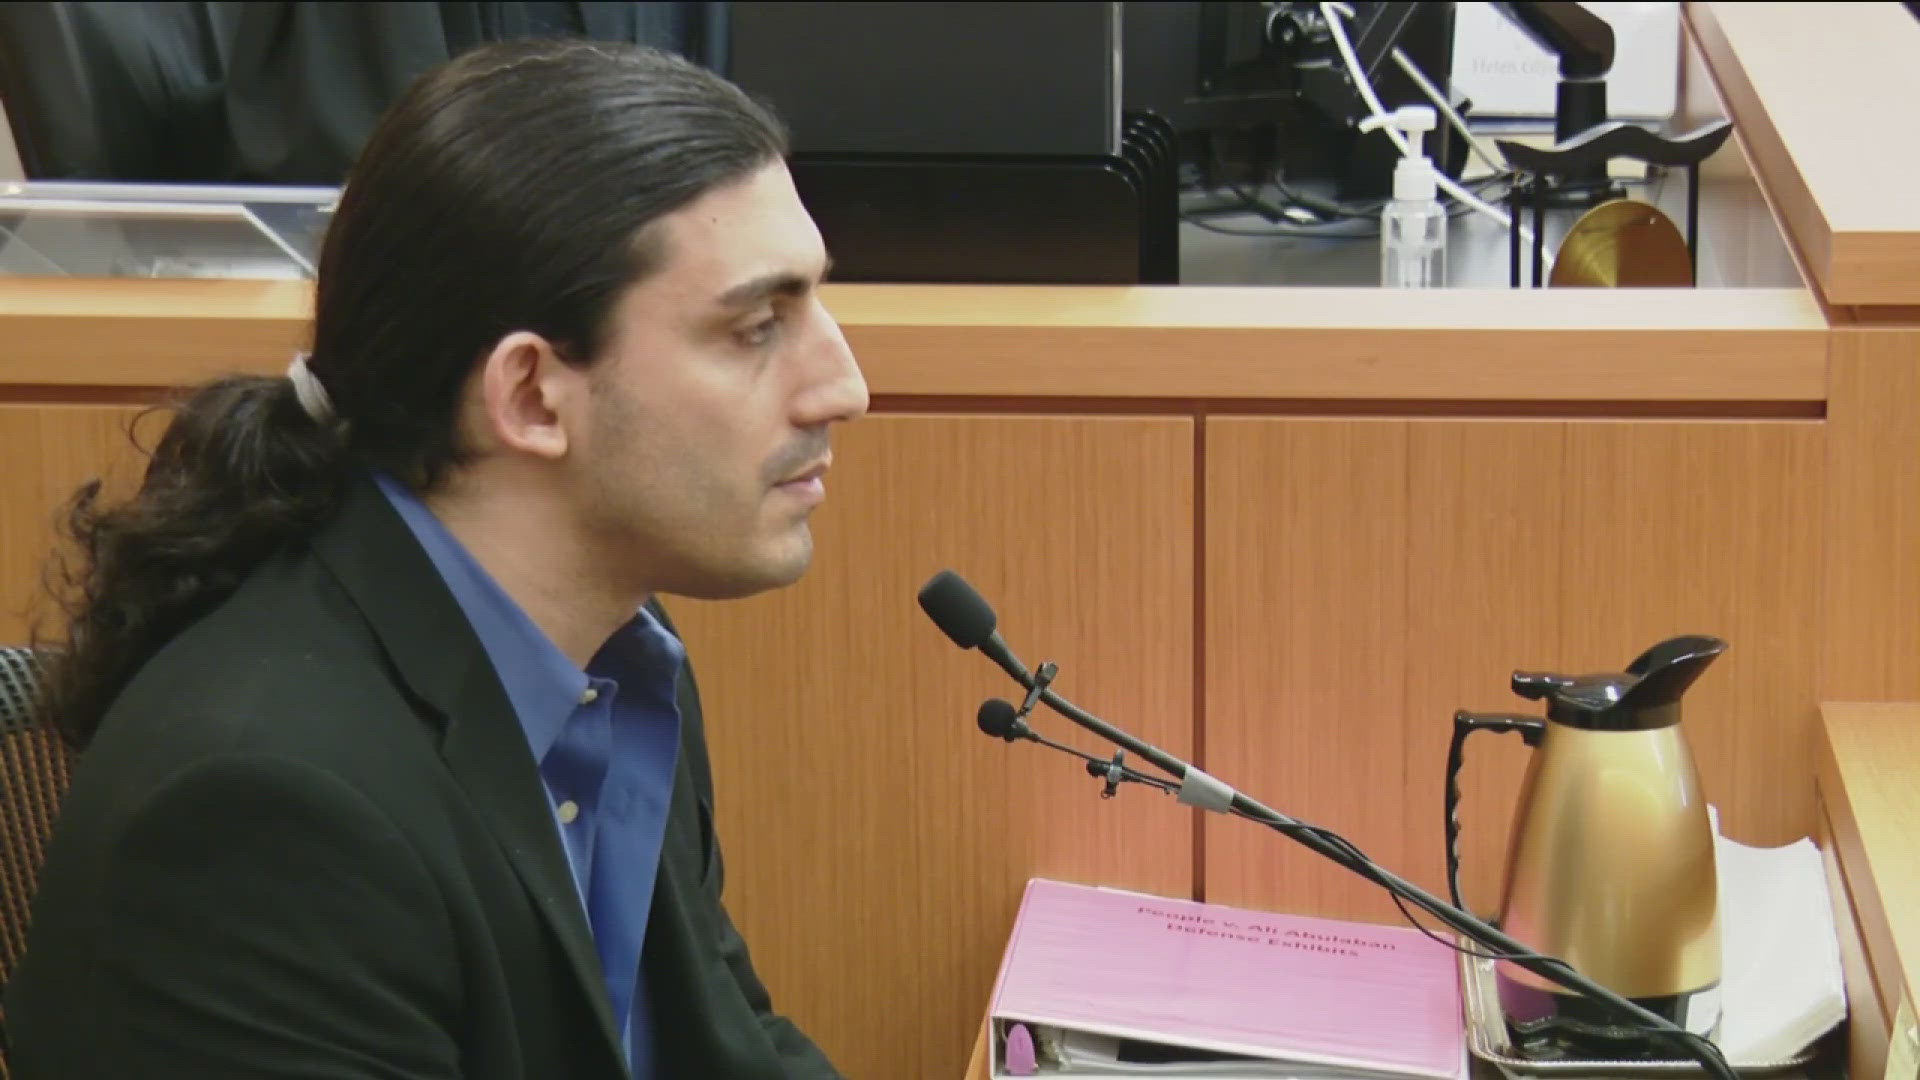 On his second day on the stand, the defense played a video message Ali Abulaban star sent to his wife Ana, demanding to know if she was cheating on him.